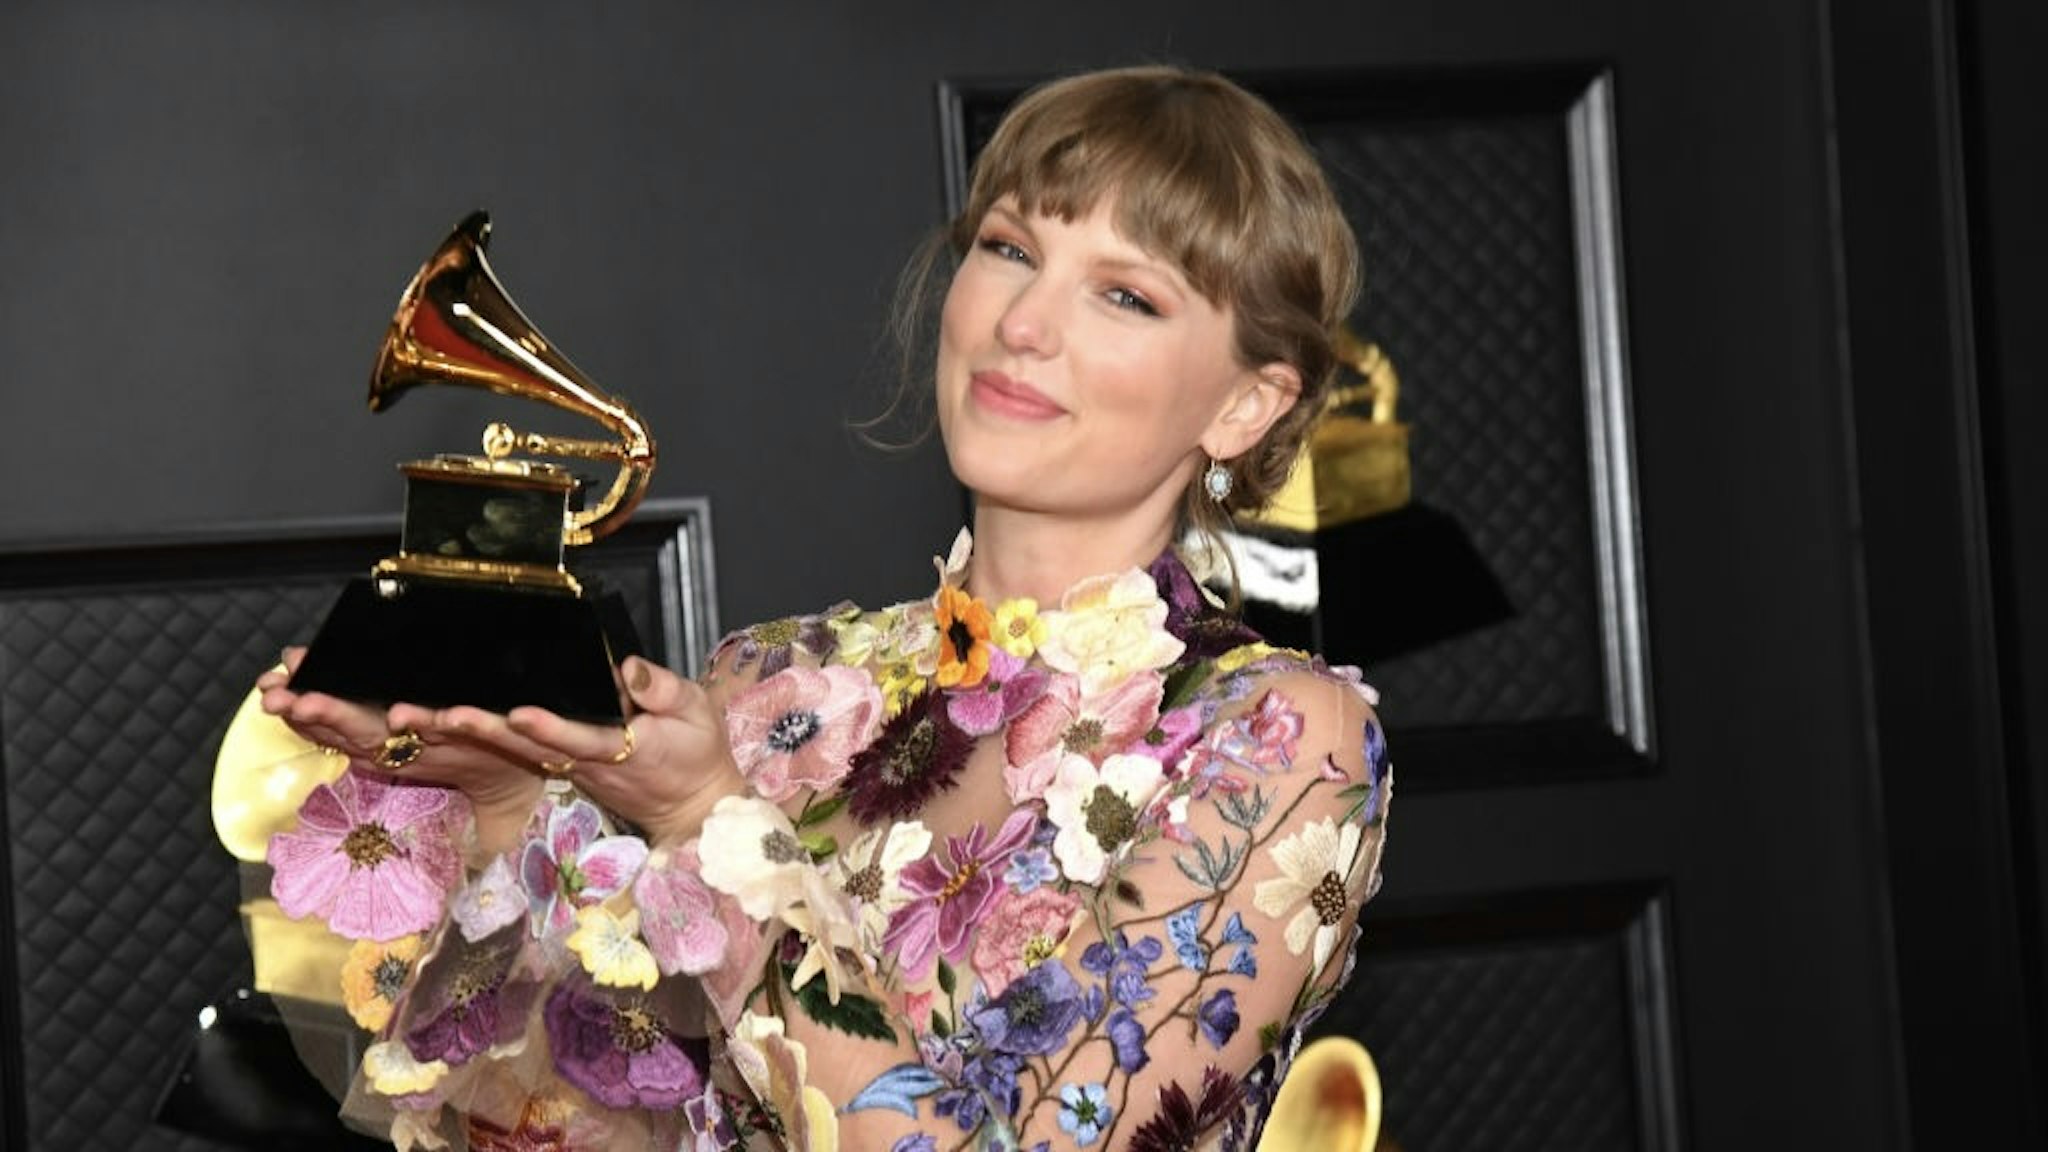 63rd Annual GRAMMY Awards – Media Room LOS ANGELES, CALIFORNIA - MARCH 14: Taylor Swift, winner of Album of the Year for 'Folklore', poses in the media room during the 63rd Annual GRAMMY Awards at Los Angeles Convention Center on March 14, 2021 in Los Angeles, California. (Photo by Kevin Mazur/Getty Images for The Recording Academy ) Kevin Mazur / Contributor